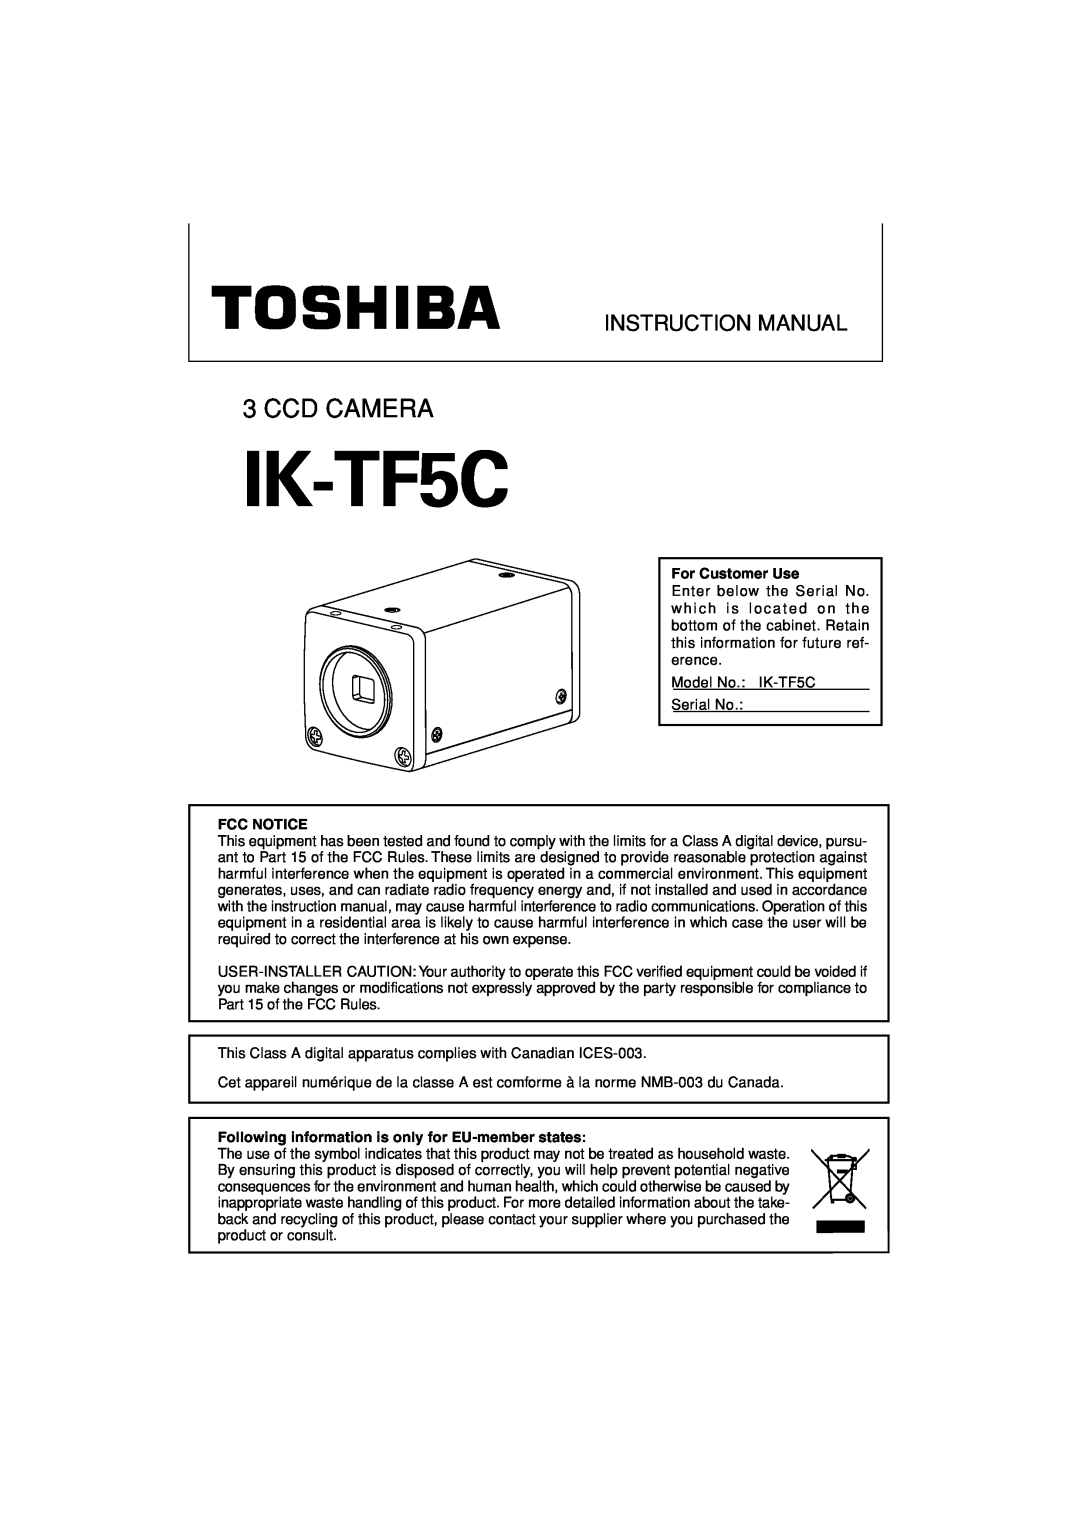 Toshiba IK-TF5C instruction manual For Customer Use, Fcc Notice, Following information is only for EU-member states 